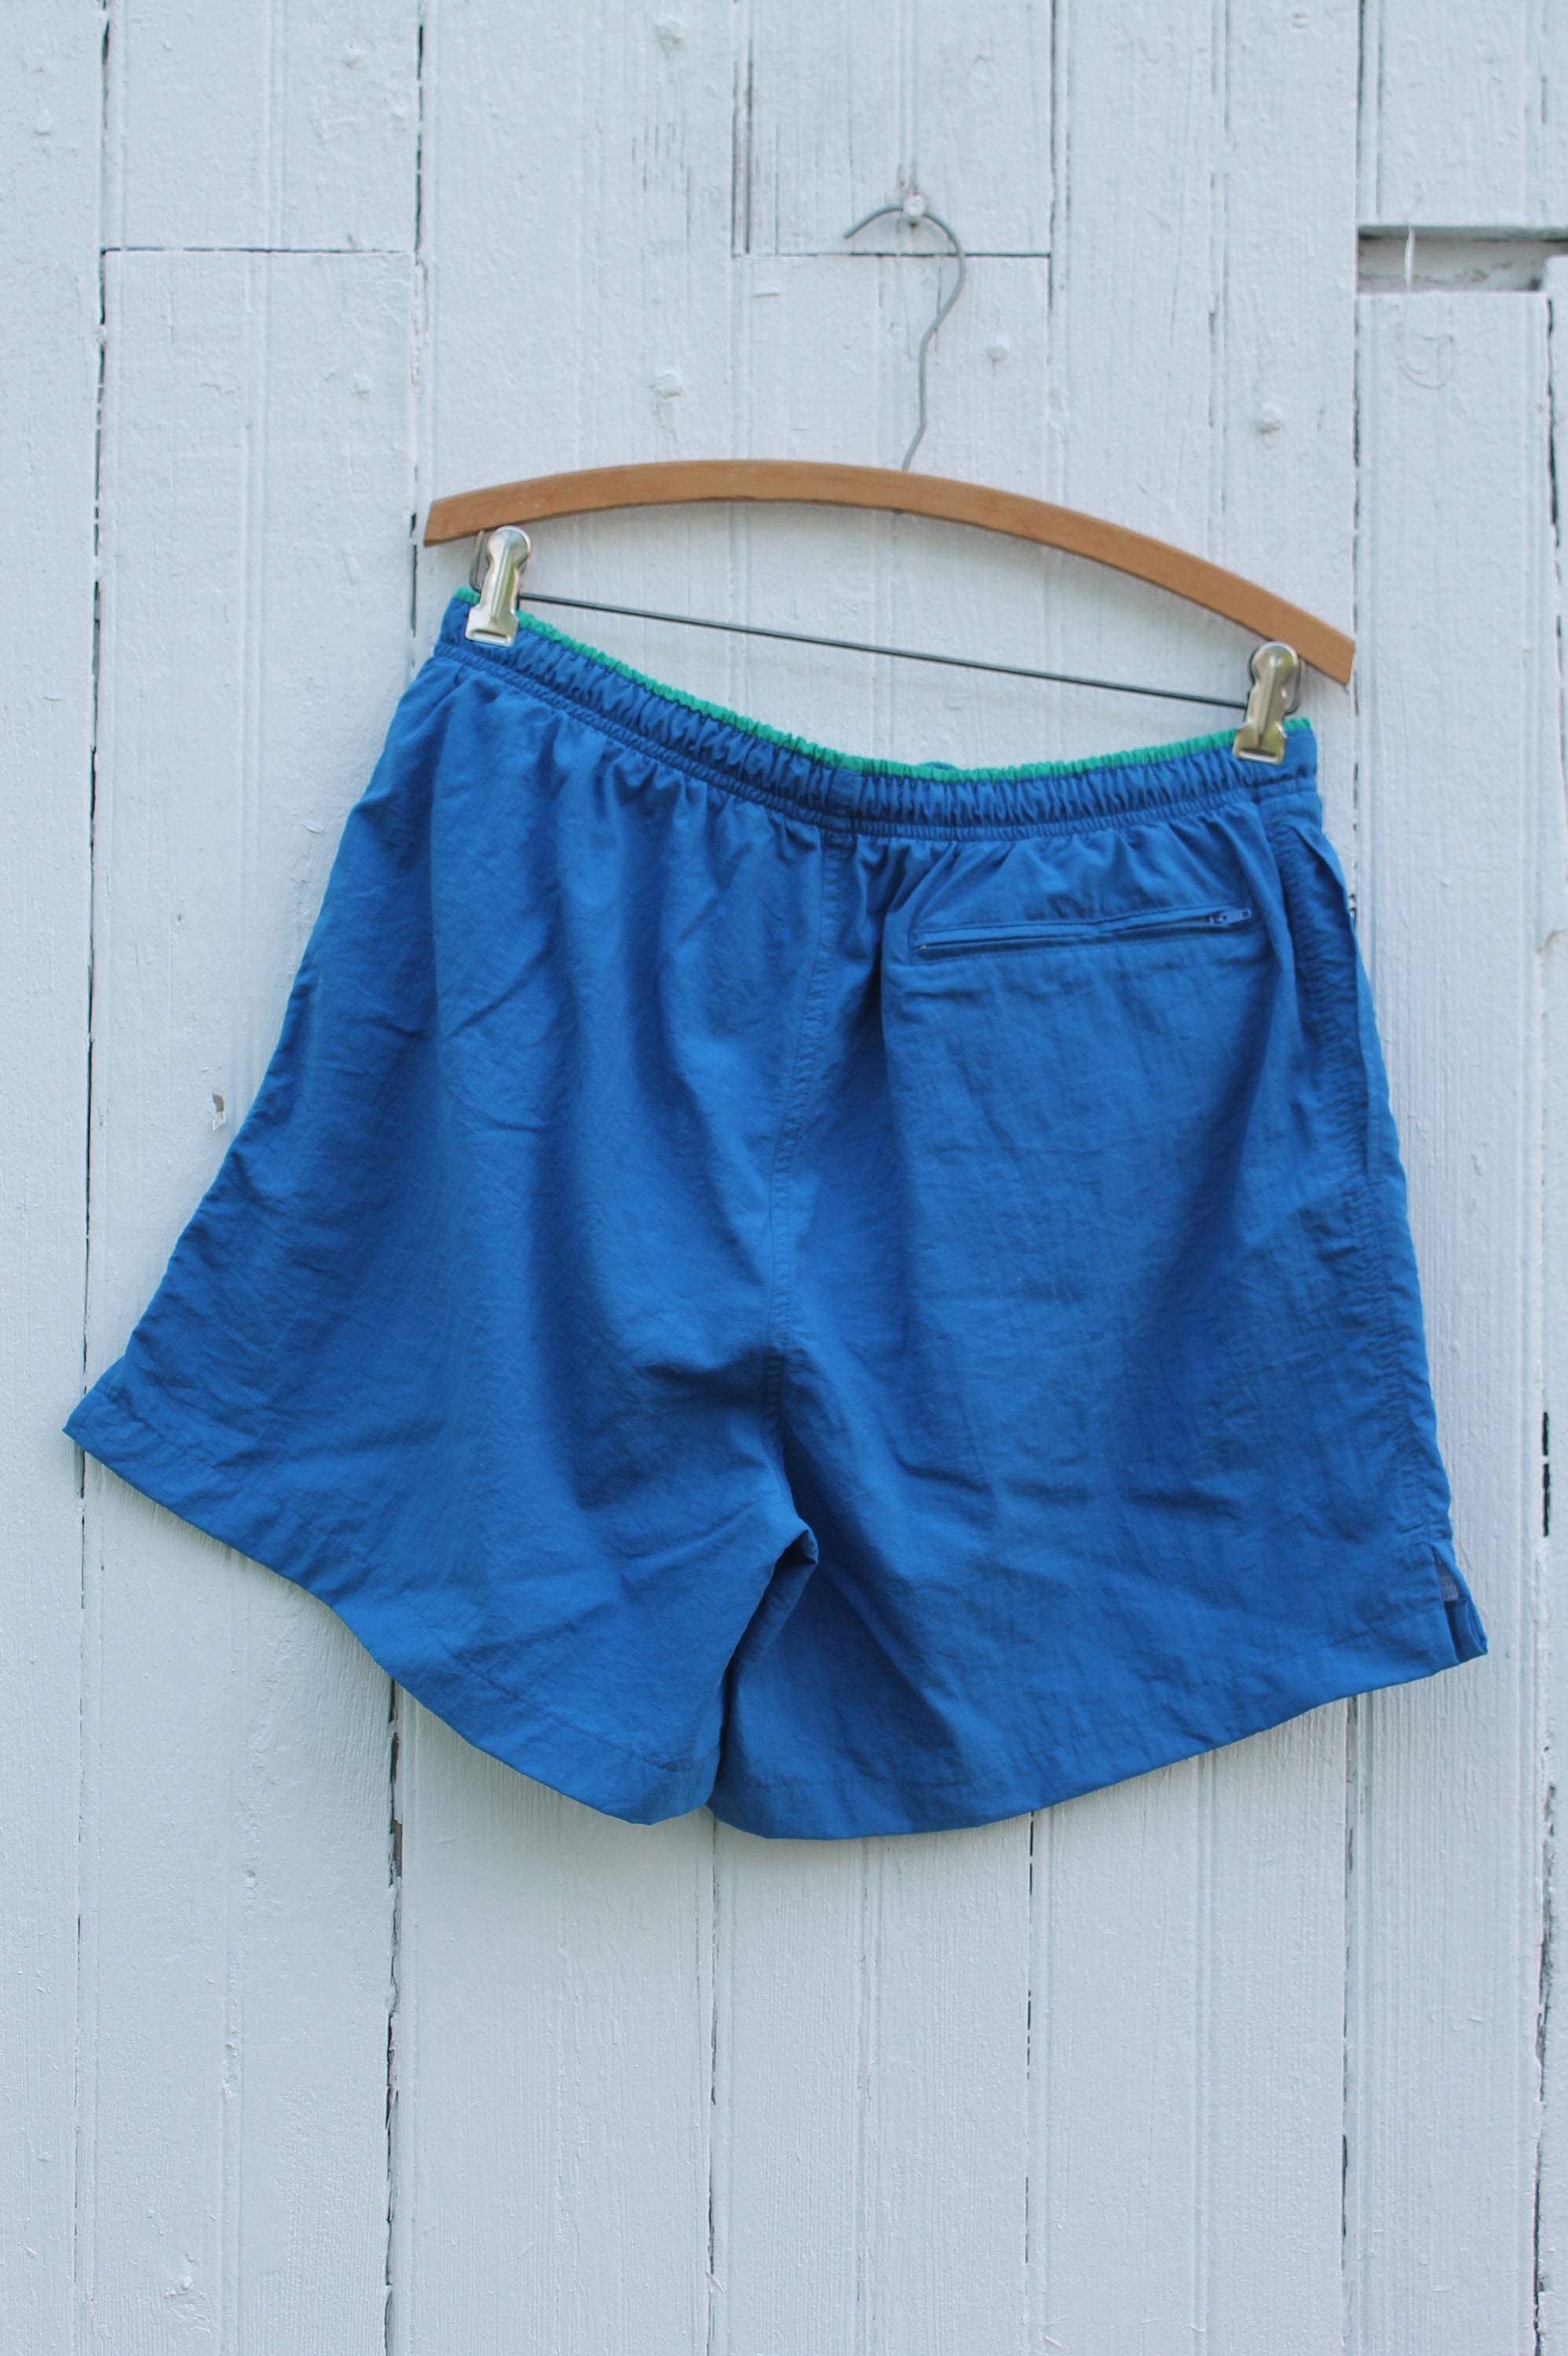 1990s Blue and Teal Swim Trunks Elastic Band and Drawstring - Etsy